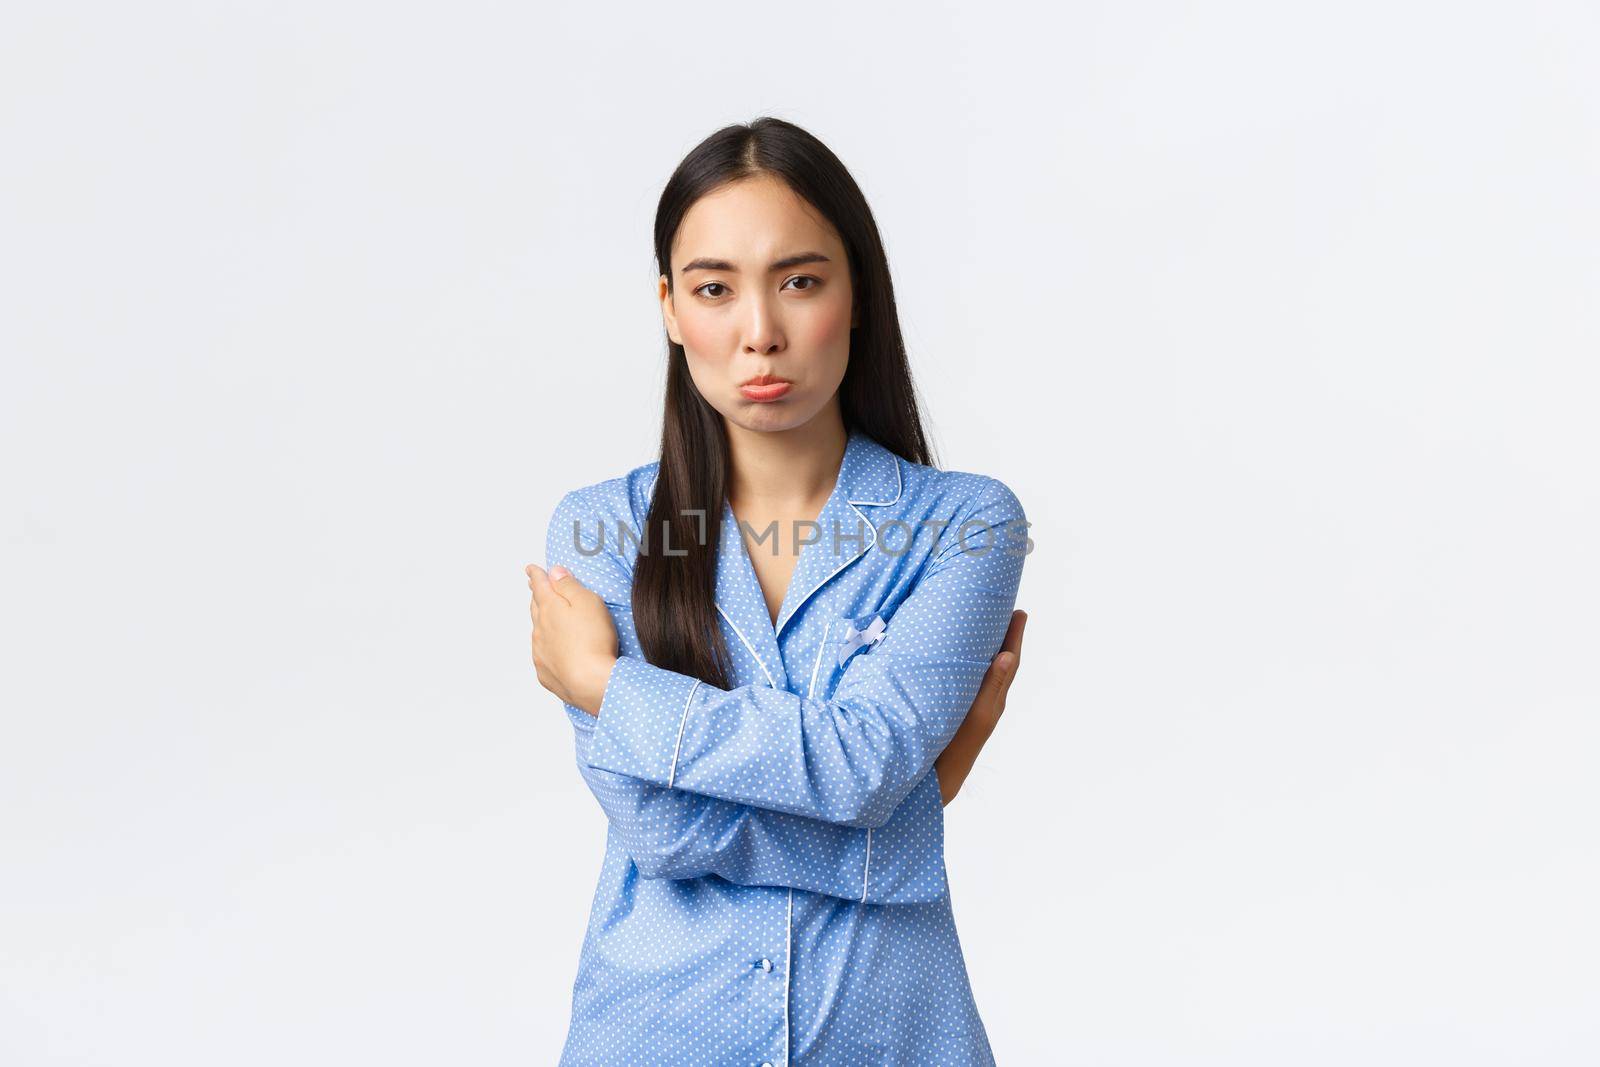 Timid and upset sulking cute asian girl in blue pajamas feeling insecure and distressed, pouting offended, hugging herself, feeling sad and insulted standing over white background.